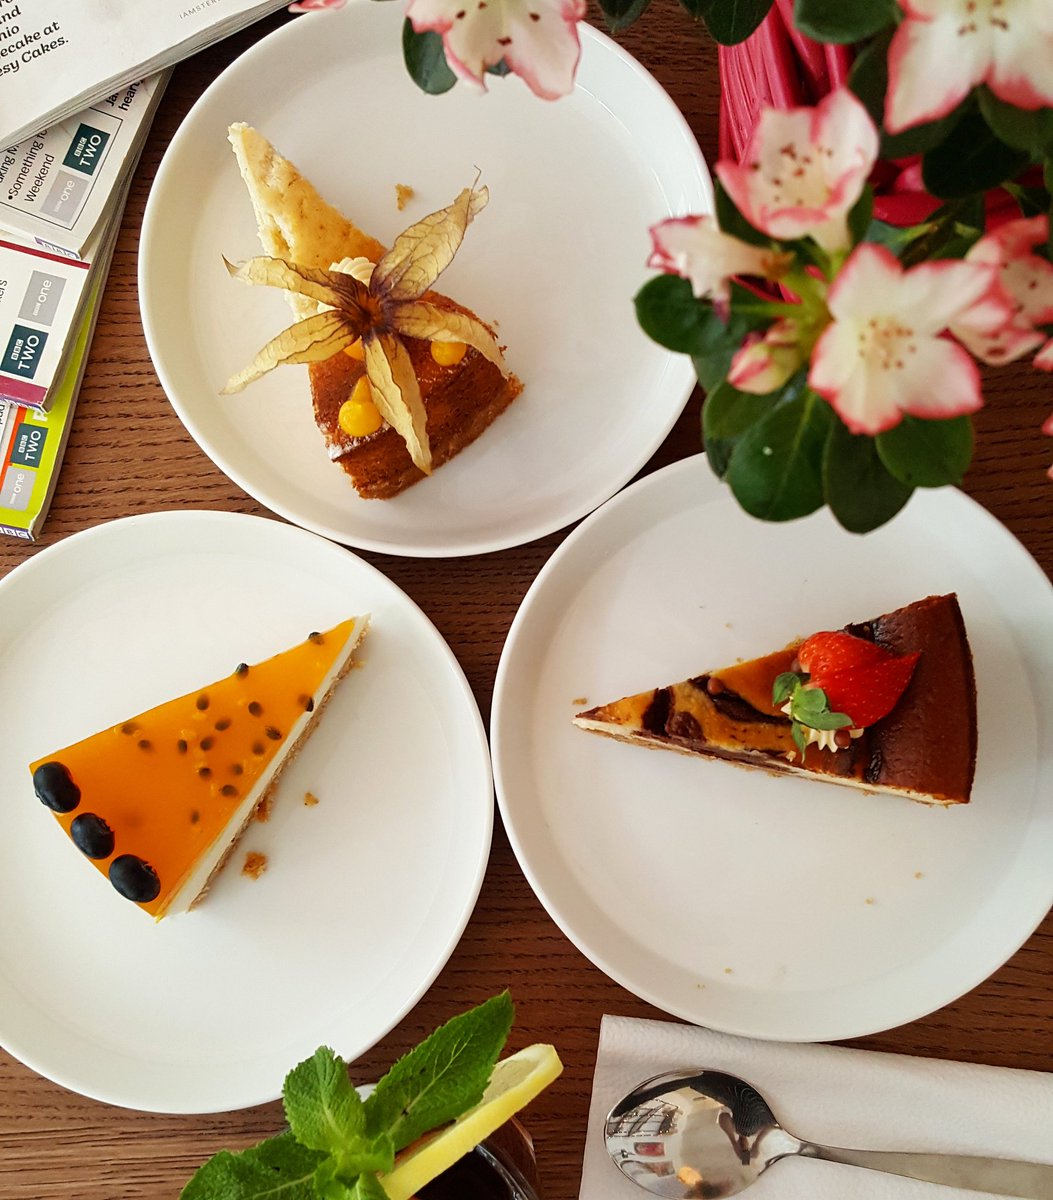 ❤Make your Tuesday feel like Friday by treating yourself one slice of the insanely delicious cheesecakes.Who wants some? 🍰❤ #amsterdamfood #iamfoodies #igholland #amsterdameats #foodamsterdam #lostinamsterdam #iloveamsterdam #netherlands #visitamsterdam #lekker #eten